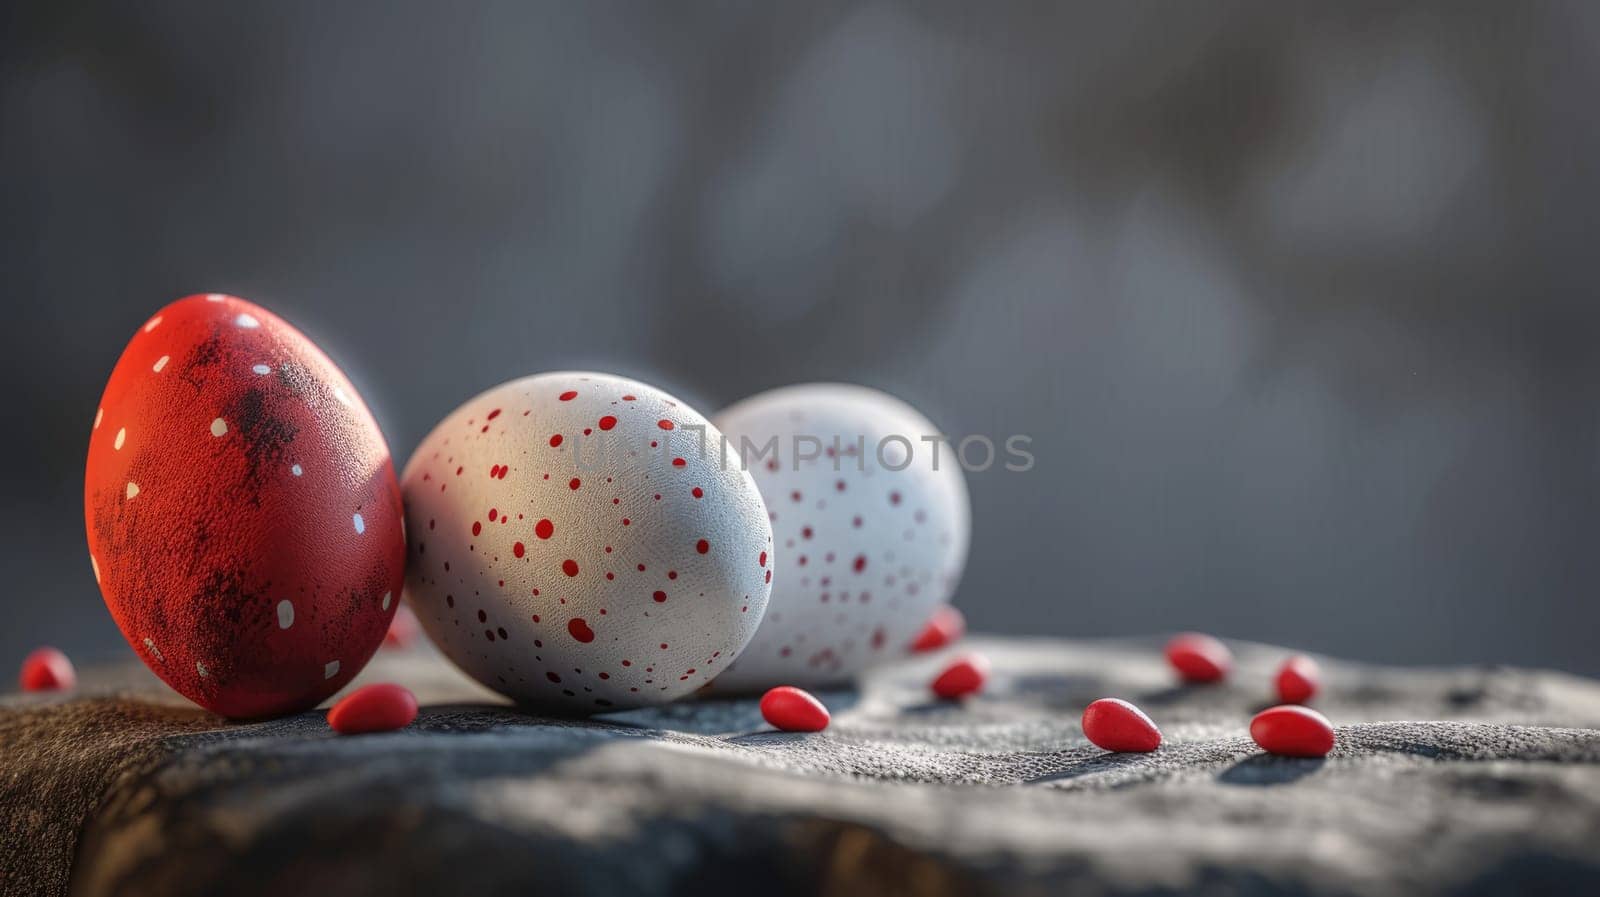 Red and white Easter Eggs on dark Background. Happy Easter eggs.